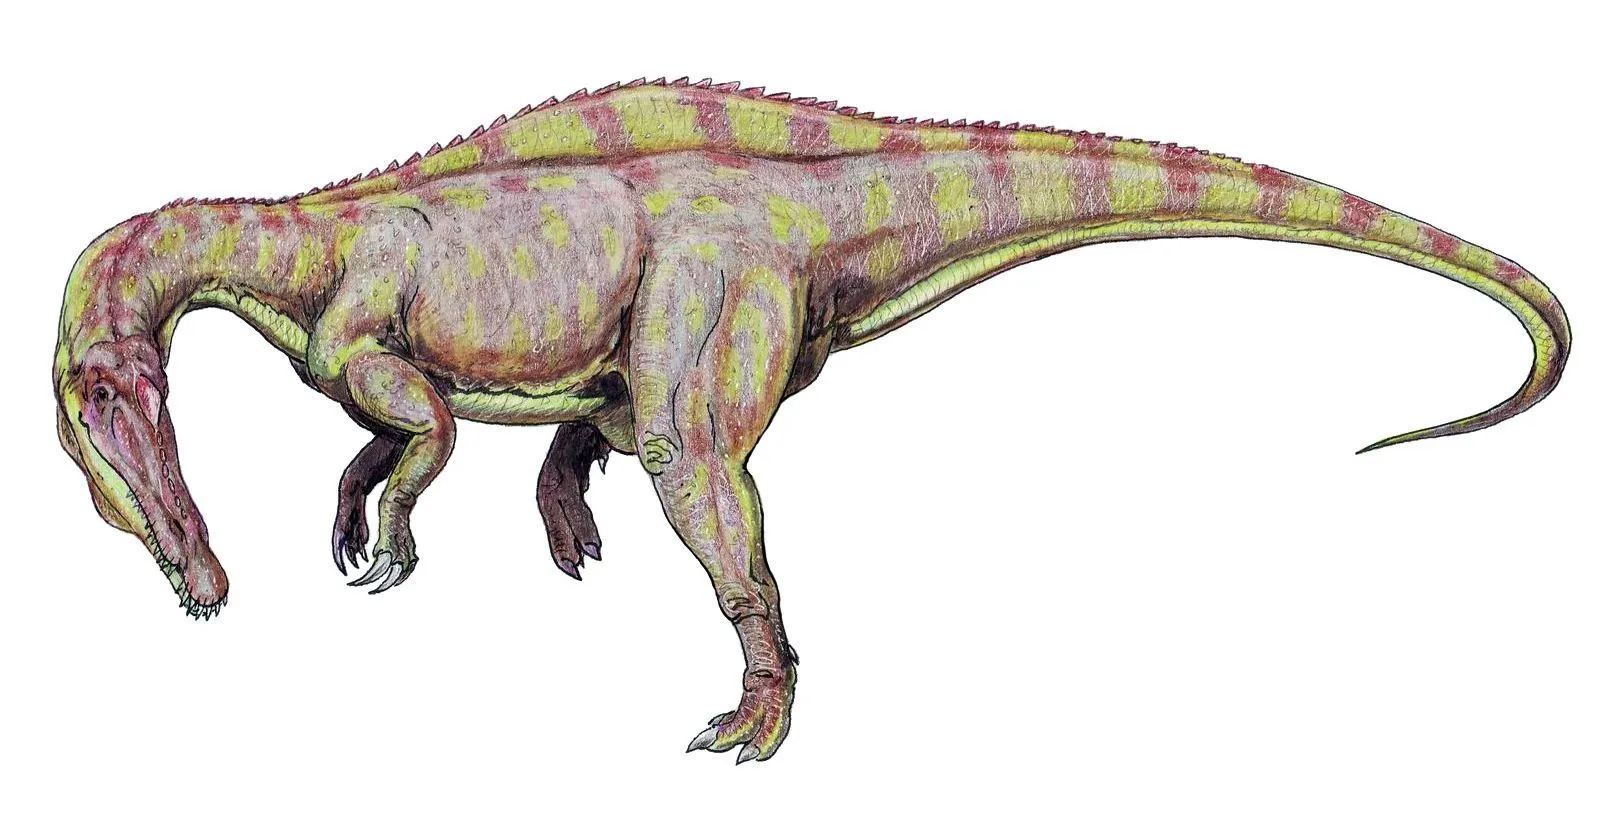 Paul Sereno was one of the descriptors of the Suchomimus genus, which means 'crocodile mimic'.